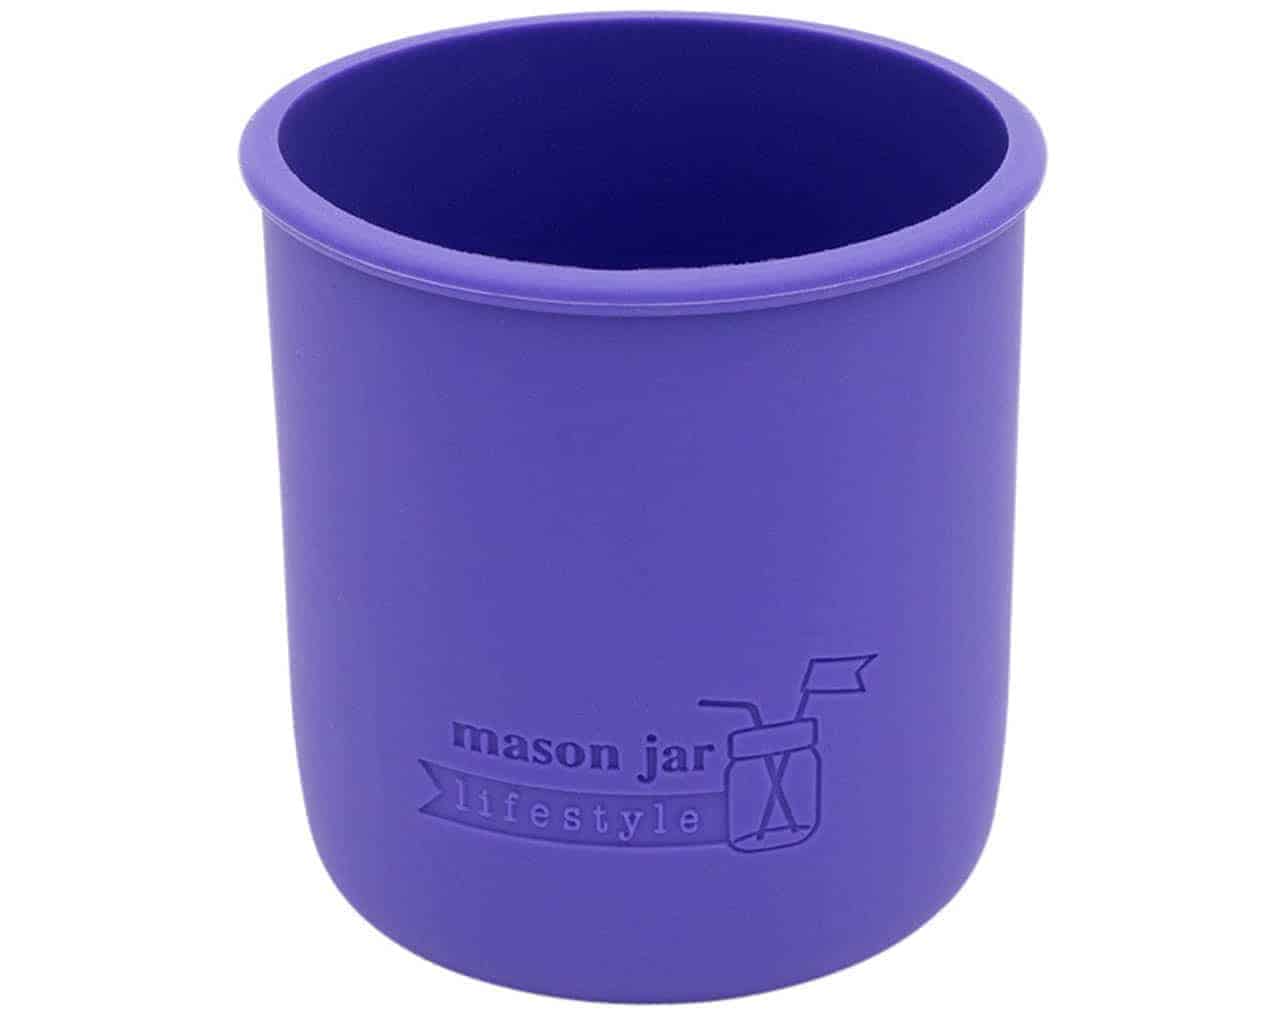 Jarjackets Silicone Mason Jar Protector Sleeve - Fits Ball, Kerr 16oz (1 pint) Wide-Mouth Jars Package of 4 (Multicolor) A